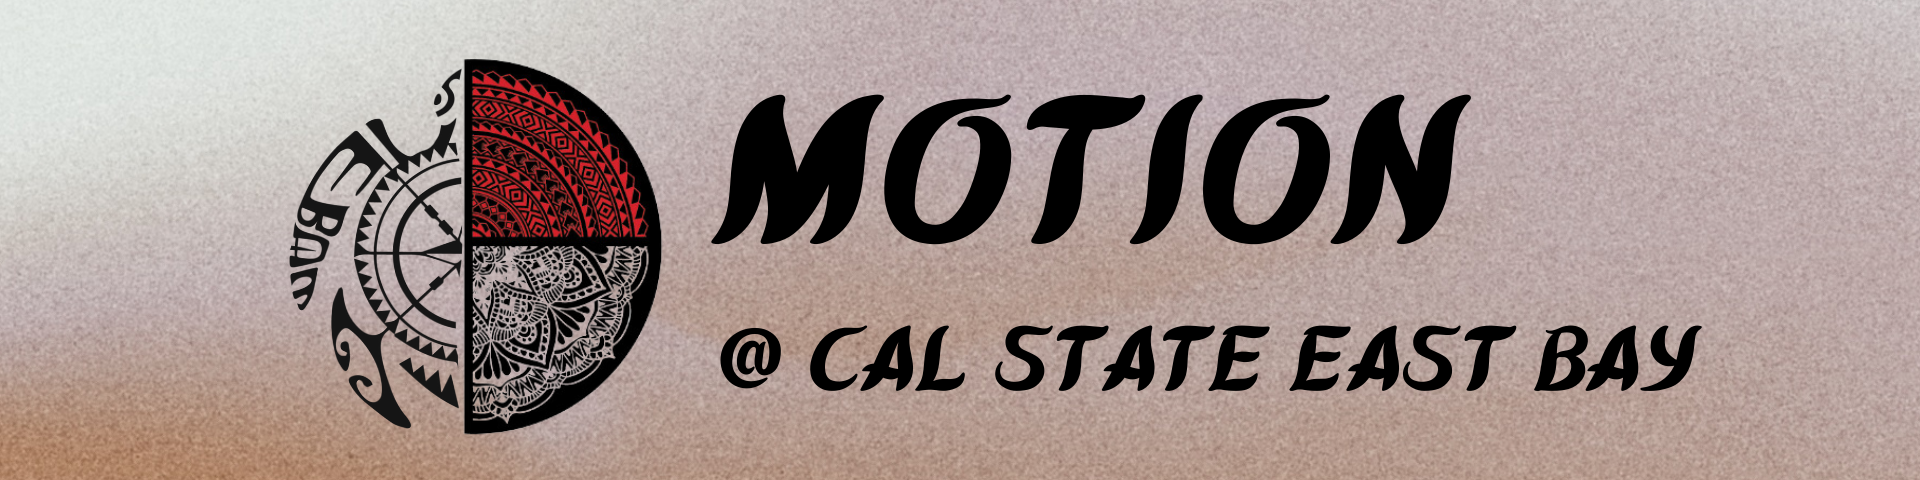 header with PIAA & APISSC logo which reads "motion @ cal state east bay"